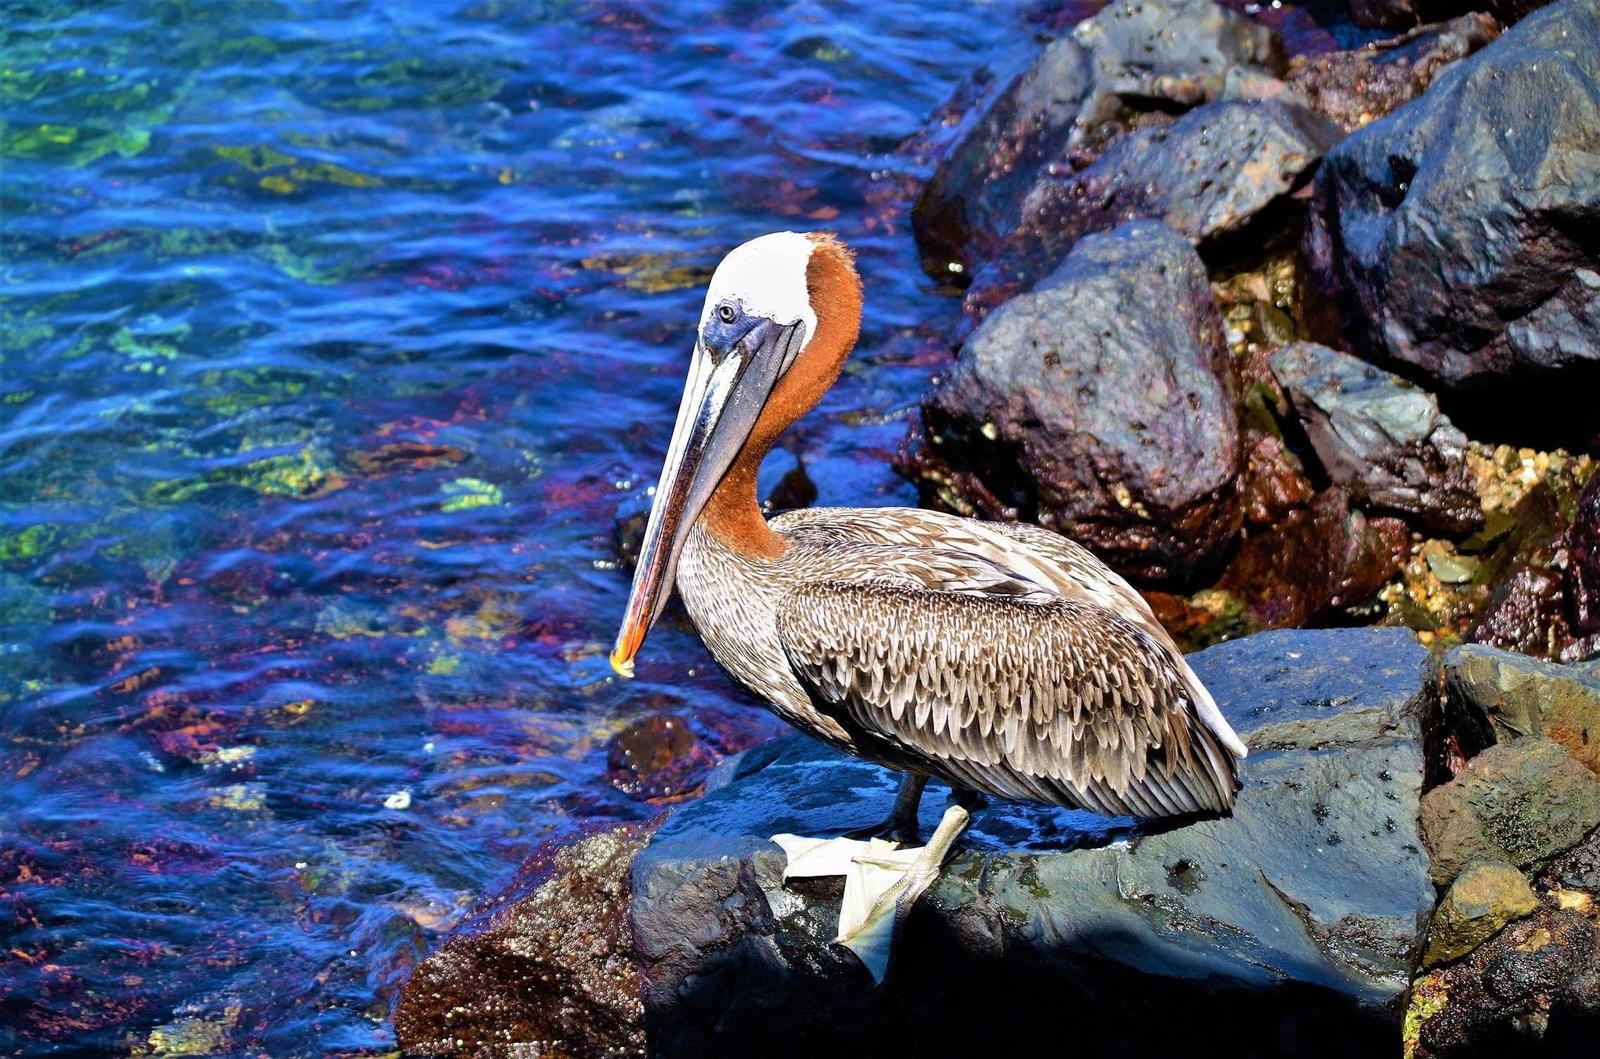 Brown Pelican (Galapagos) Photo by Alicia Thatcher